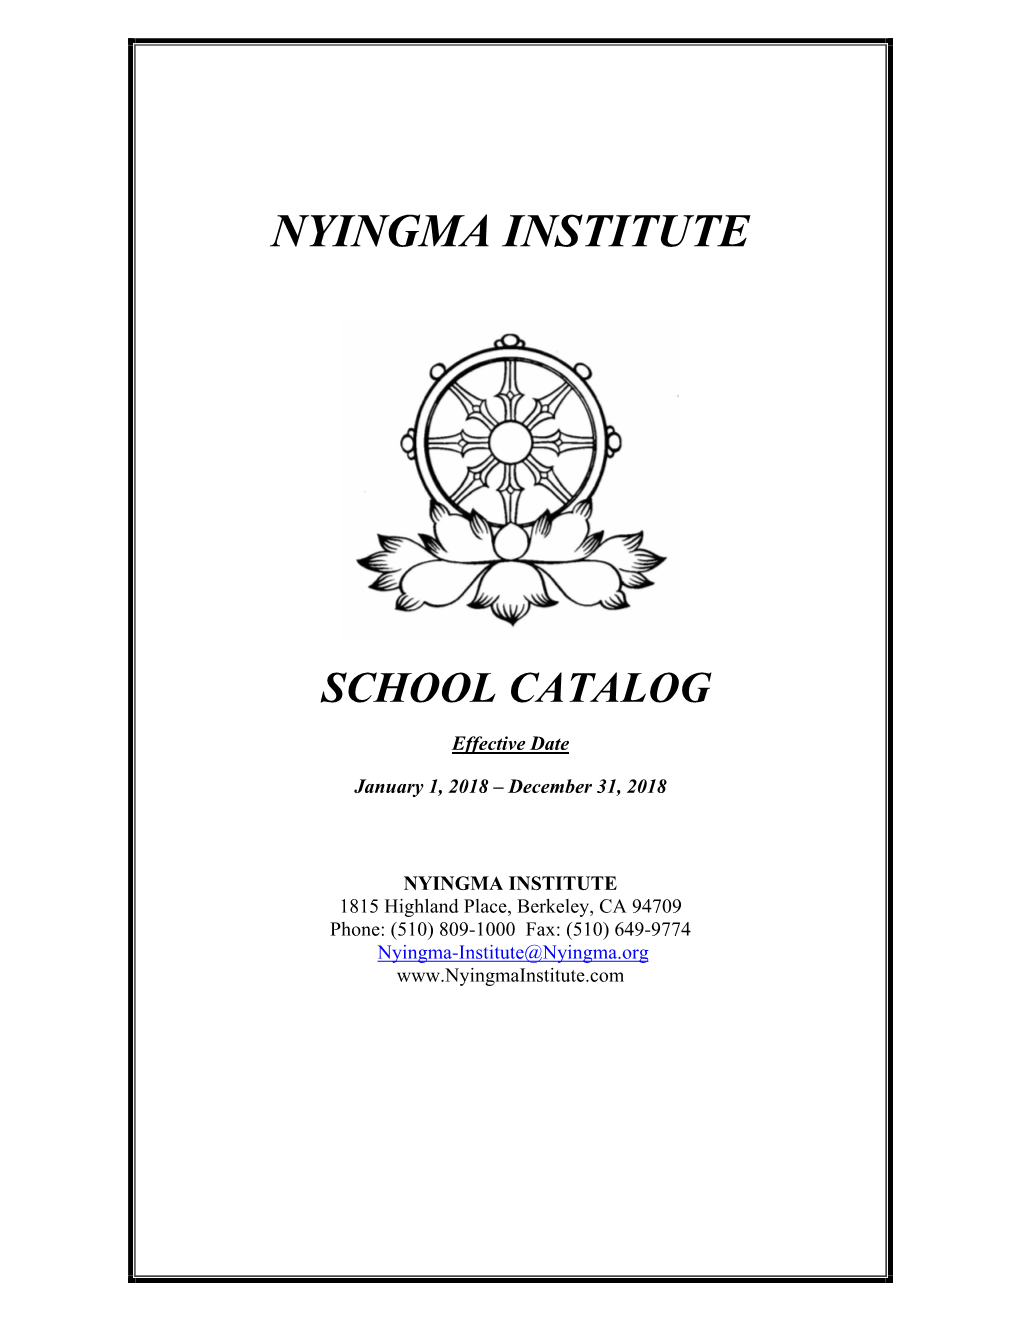 Nyingma Institute School Catalog That Contains the Rules, Regulations, Course Completion Requirements, and Costs for the Specific Program(S) in Which I Have Enrolled